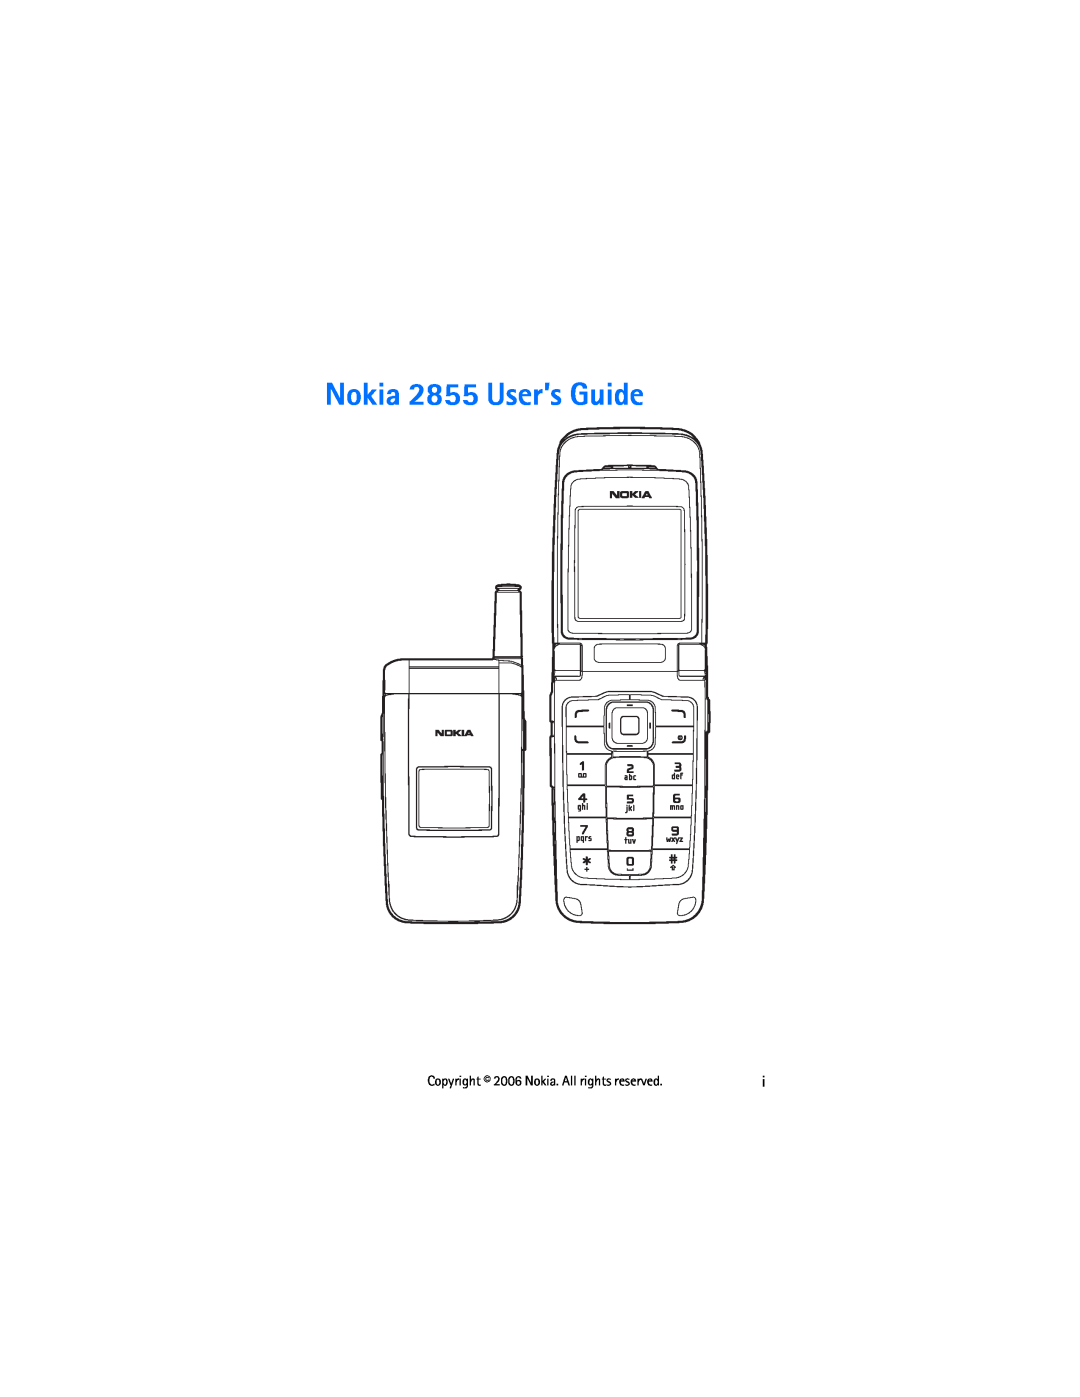 Nokia manual Copyright 2006 Nokia. All rights reserved, Nokia 2855 User’s Guide 